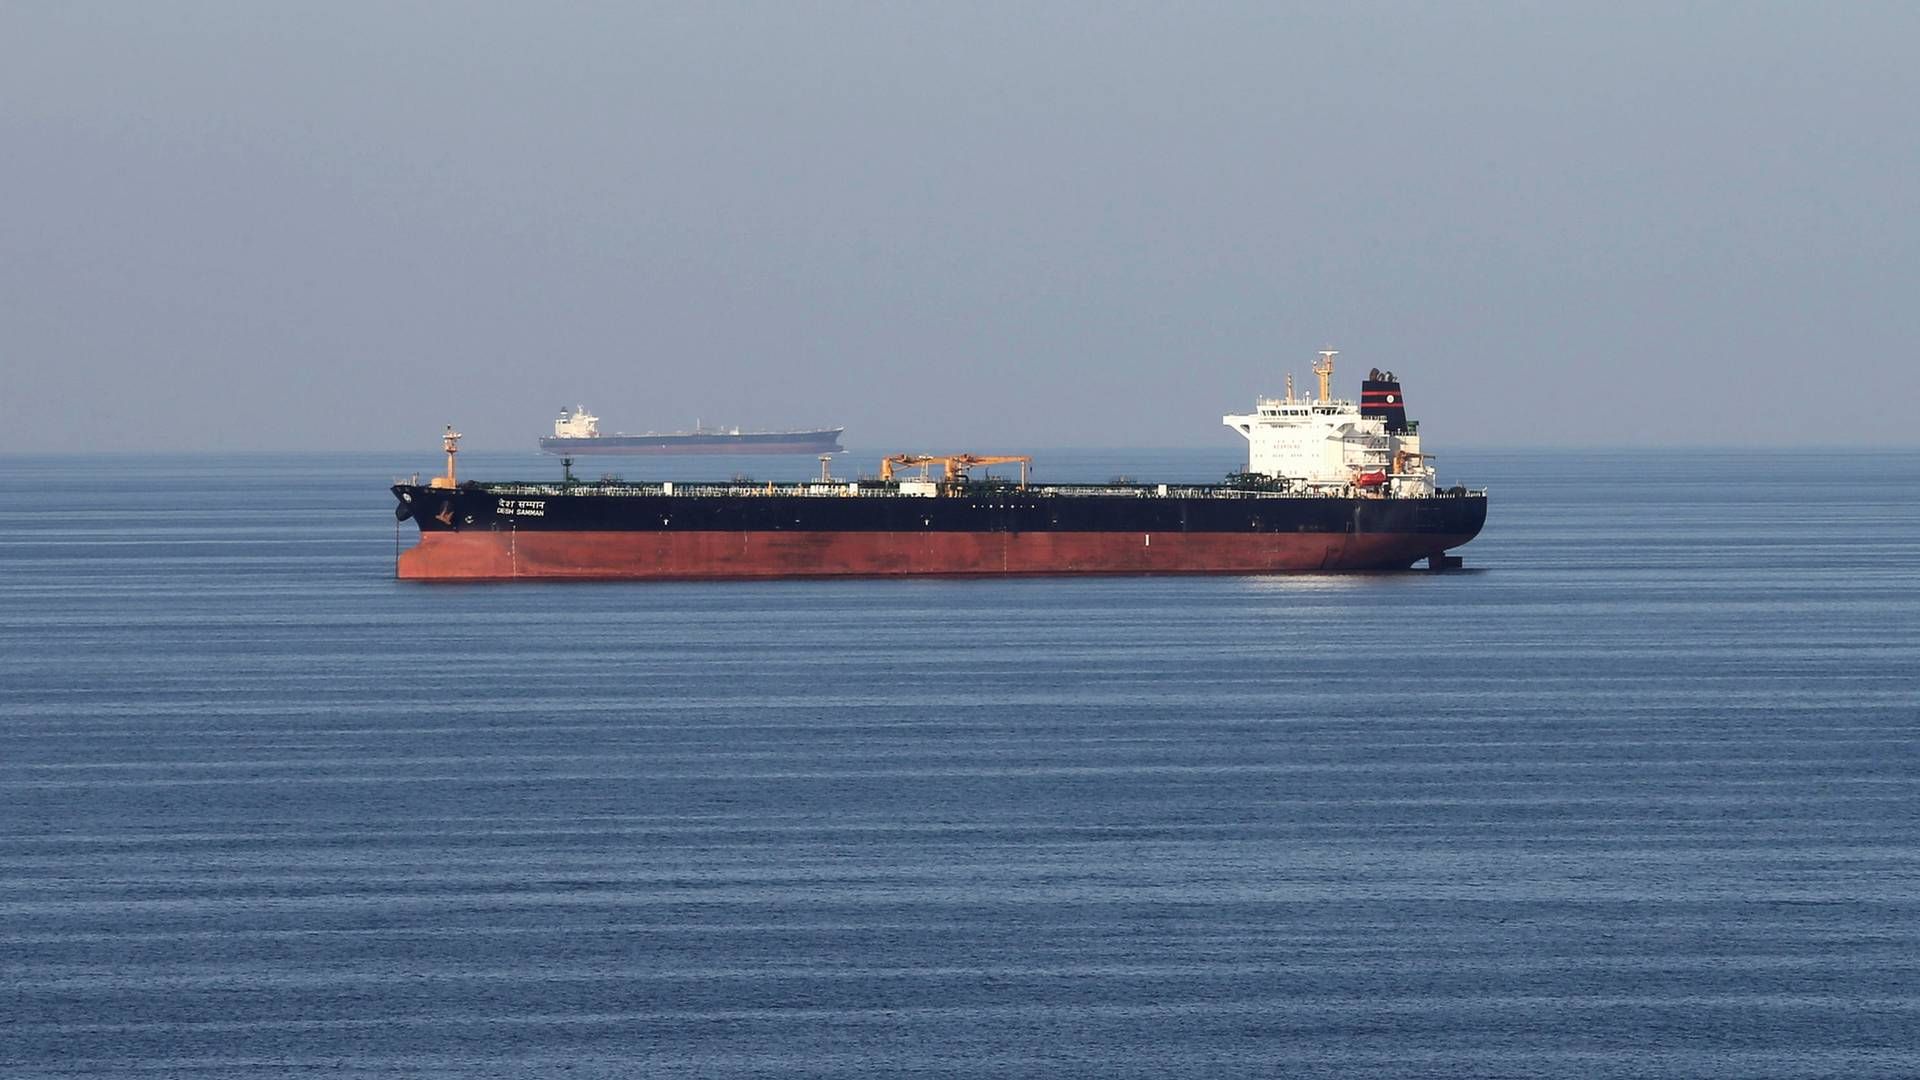 The Strait of Hormuz is a chokepoint for crude trade. The picture is not of the tanker, which has allegedly been seized. | Photo: HAMAD I MOHAMMED/REUTERS / X01444